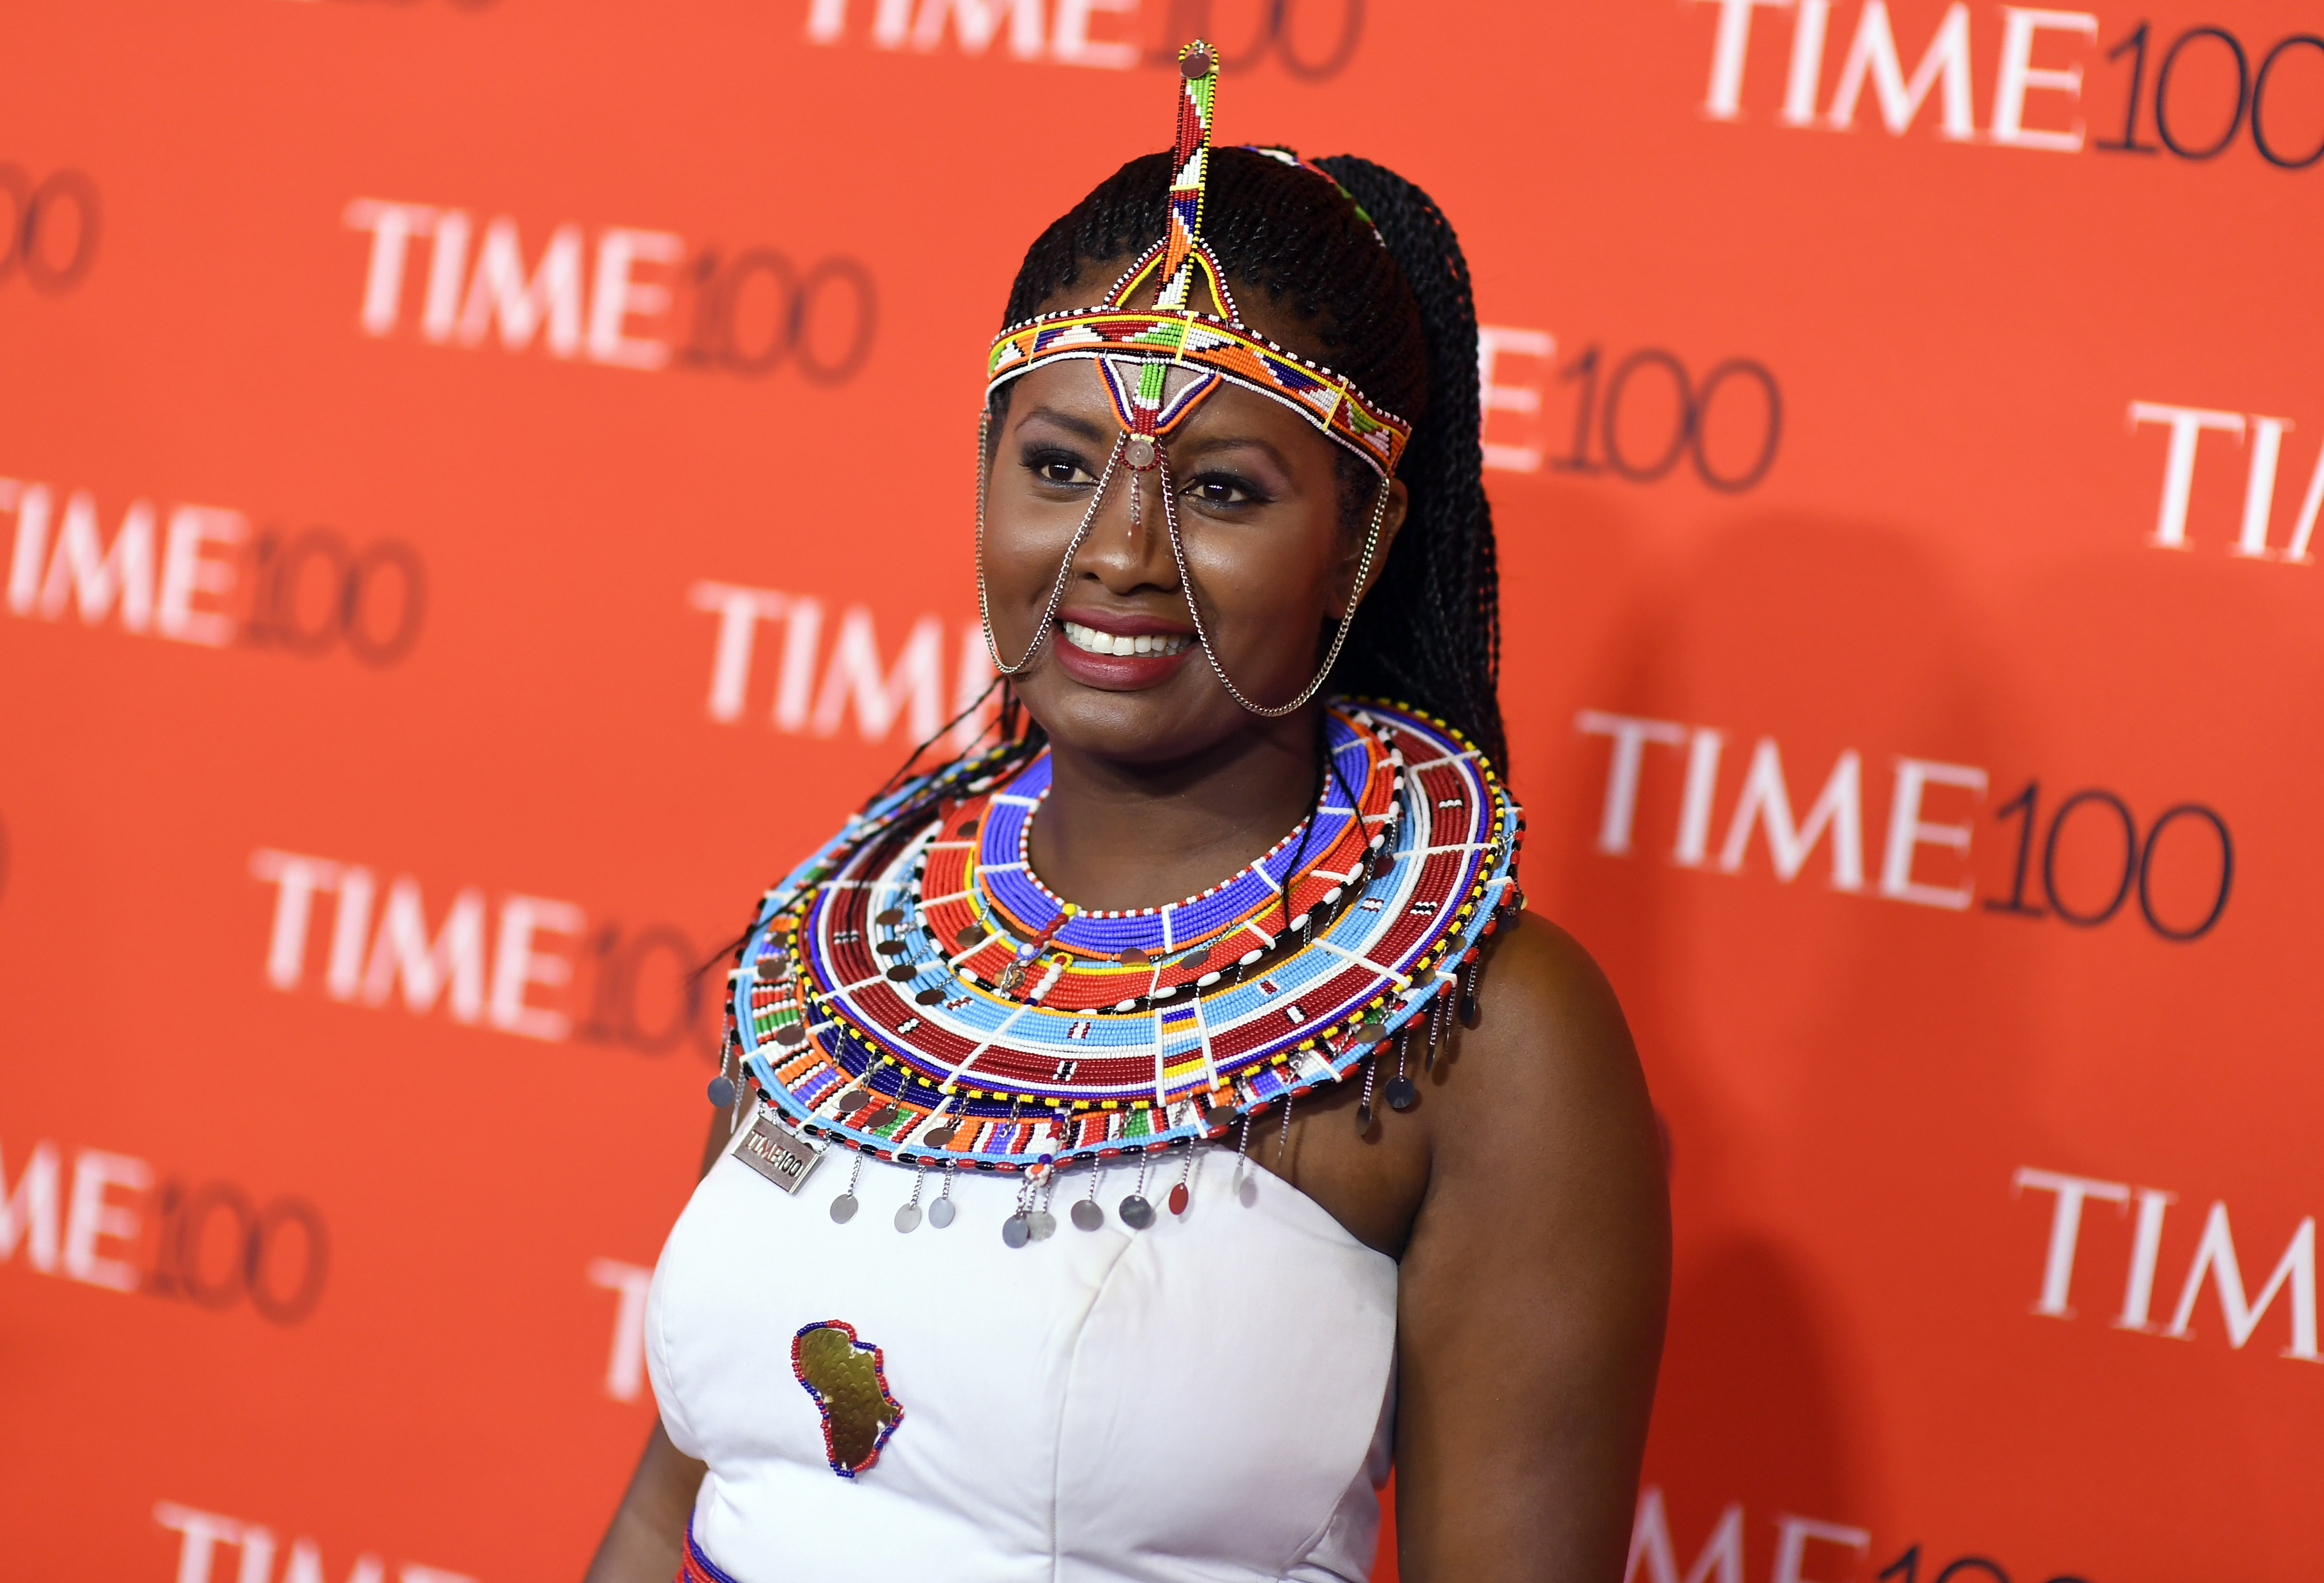 TOPSHOT - Nice Nailantei Leng'ete attends the TIME 100 Gala celebrating its annual list of the 100 Most Influential People In The World at Frederick P. Rose Hall, Jazz at Lincoln Center on April 24, 2018 in New York City. (Photo by ANGELA WEISS / AFP)        (Photo credit should read ANGELA WEISS/AFP/Getty Images)